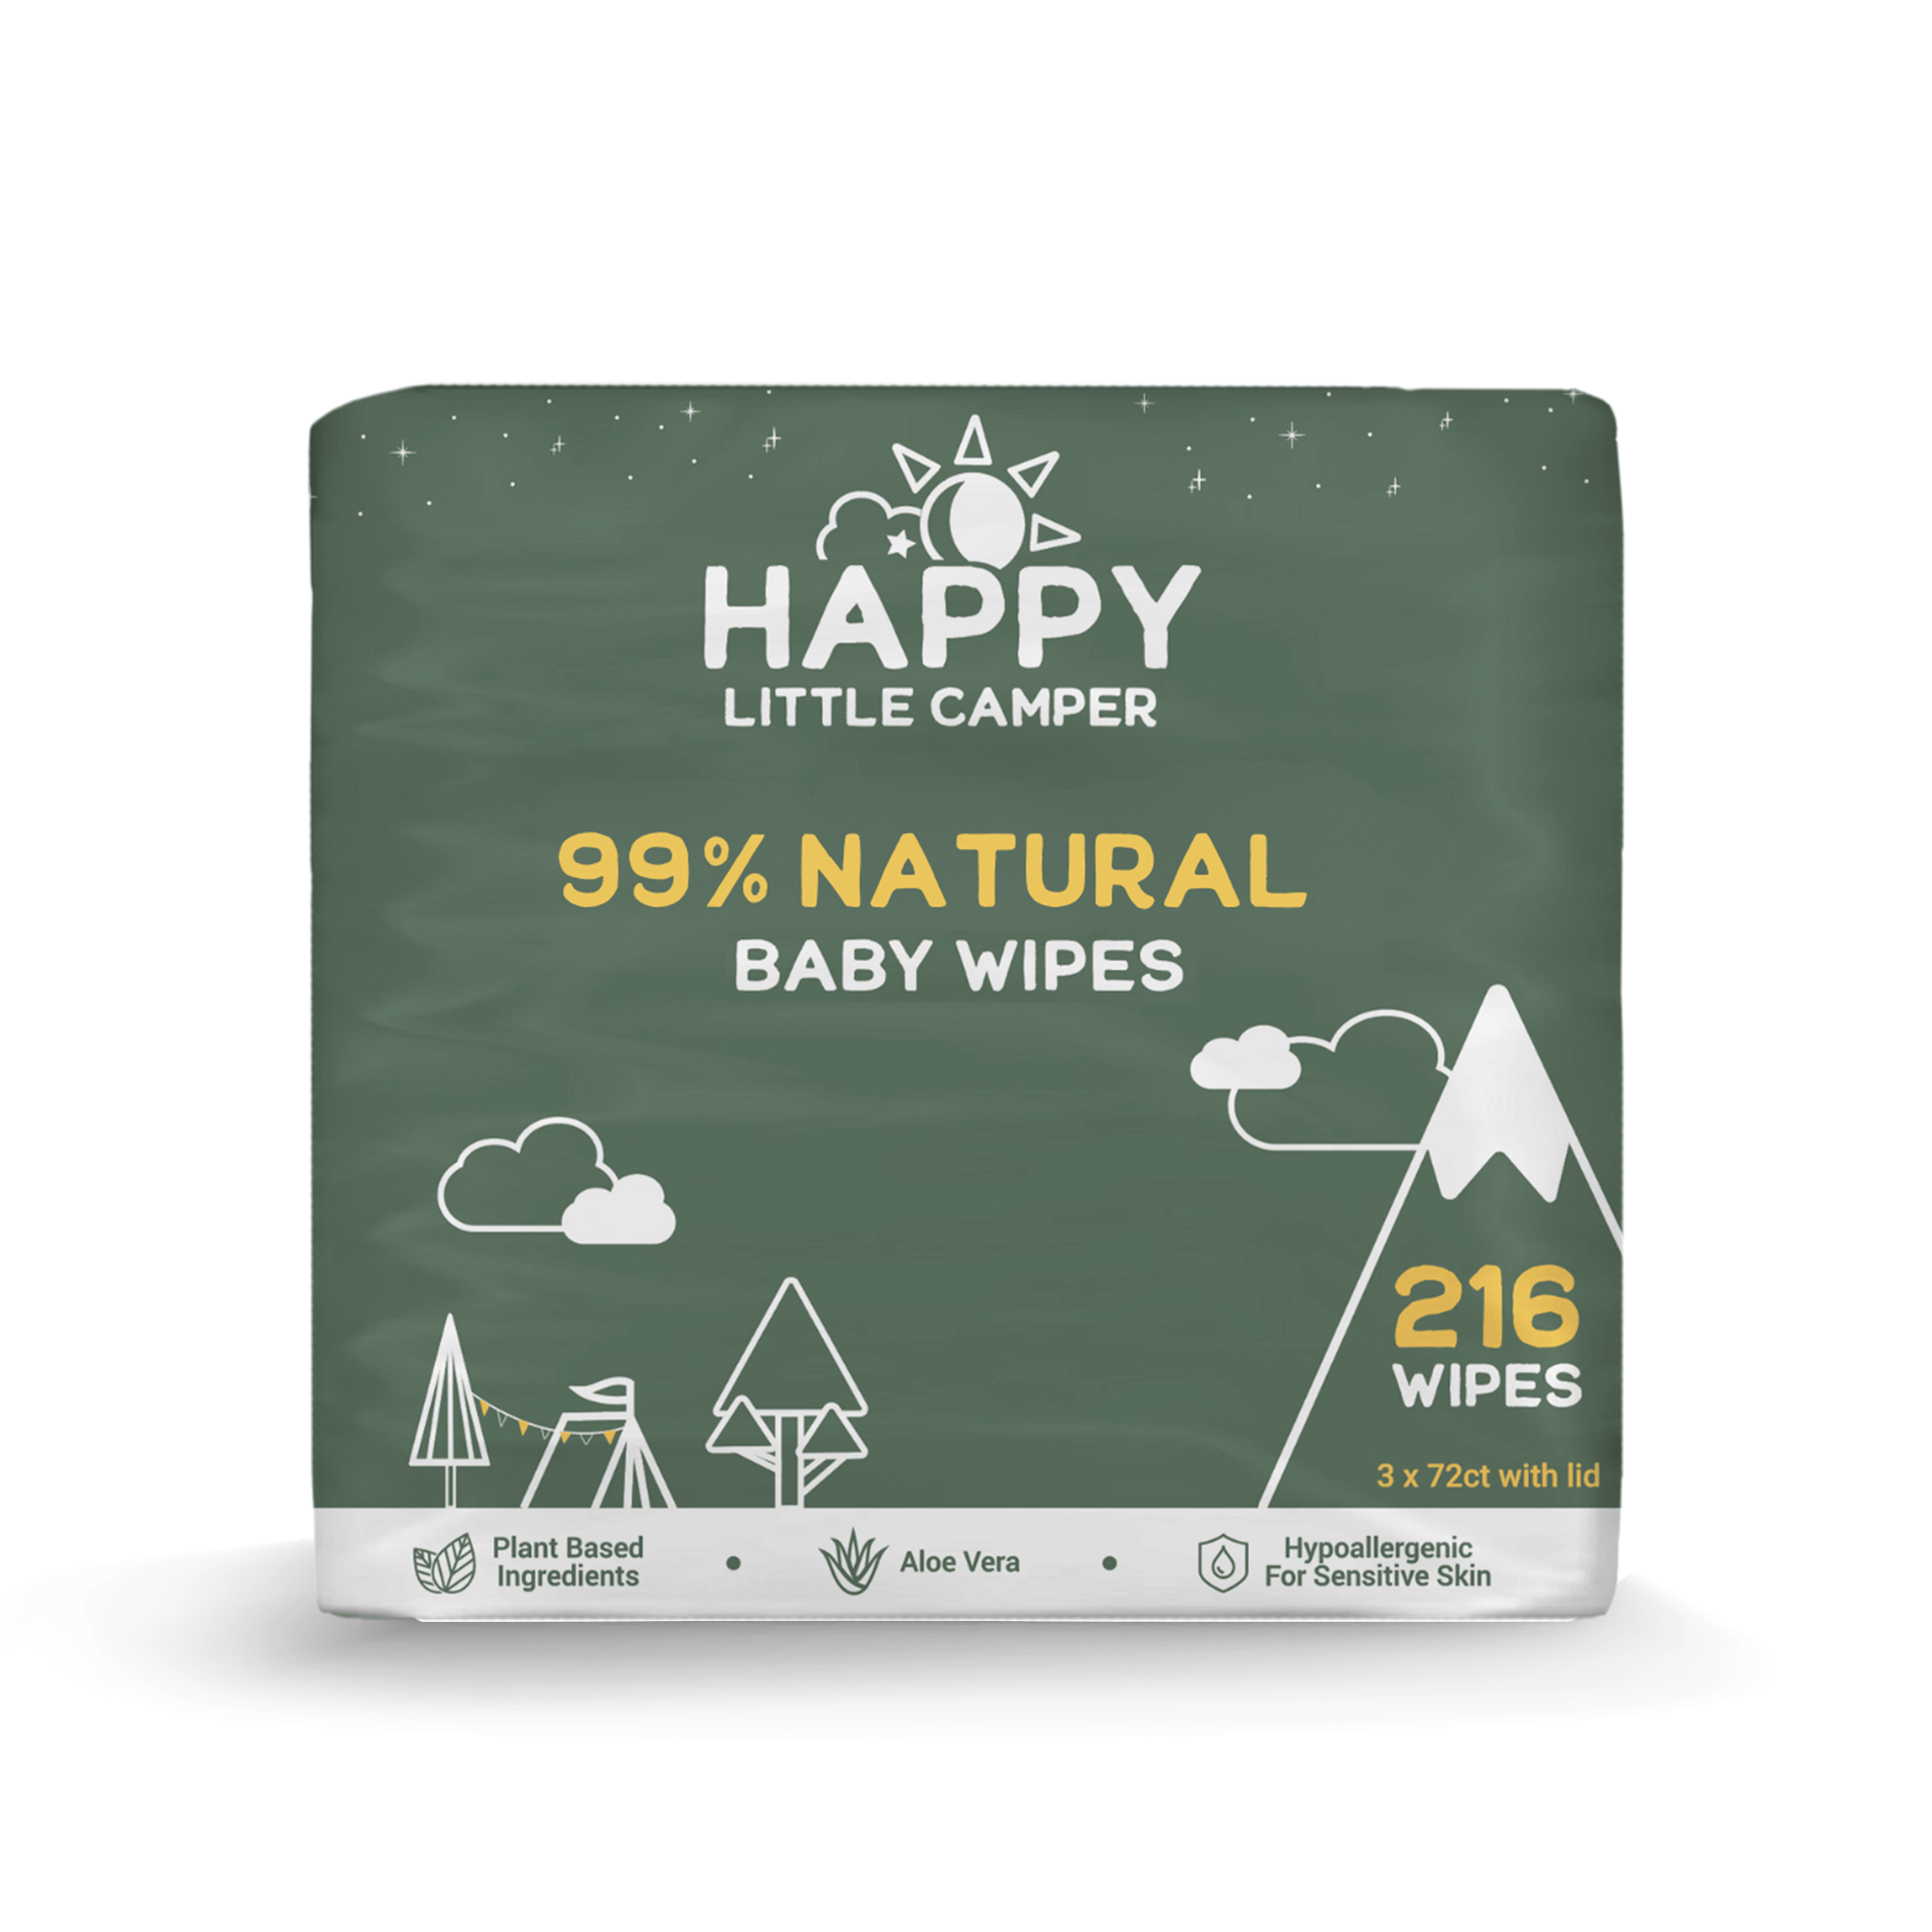 Happy Little Camper Wipes 216 count All Natural Cotton Baby Wipes With Aloe Vera Happy Little Camper